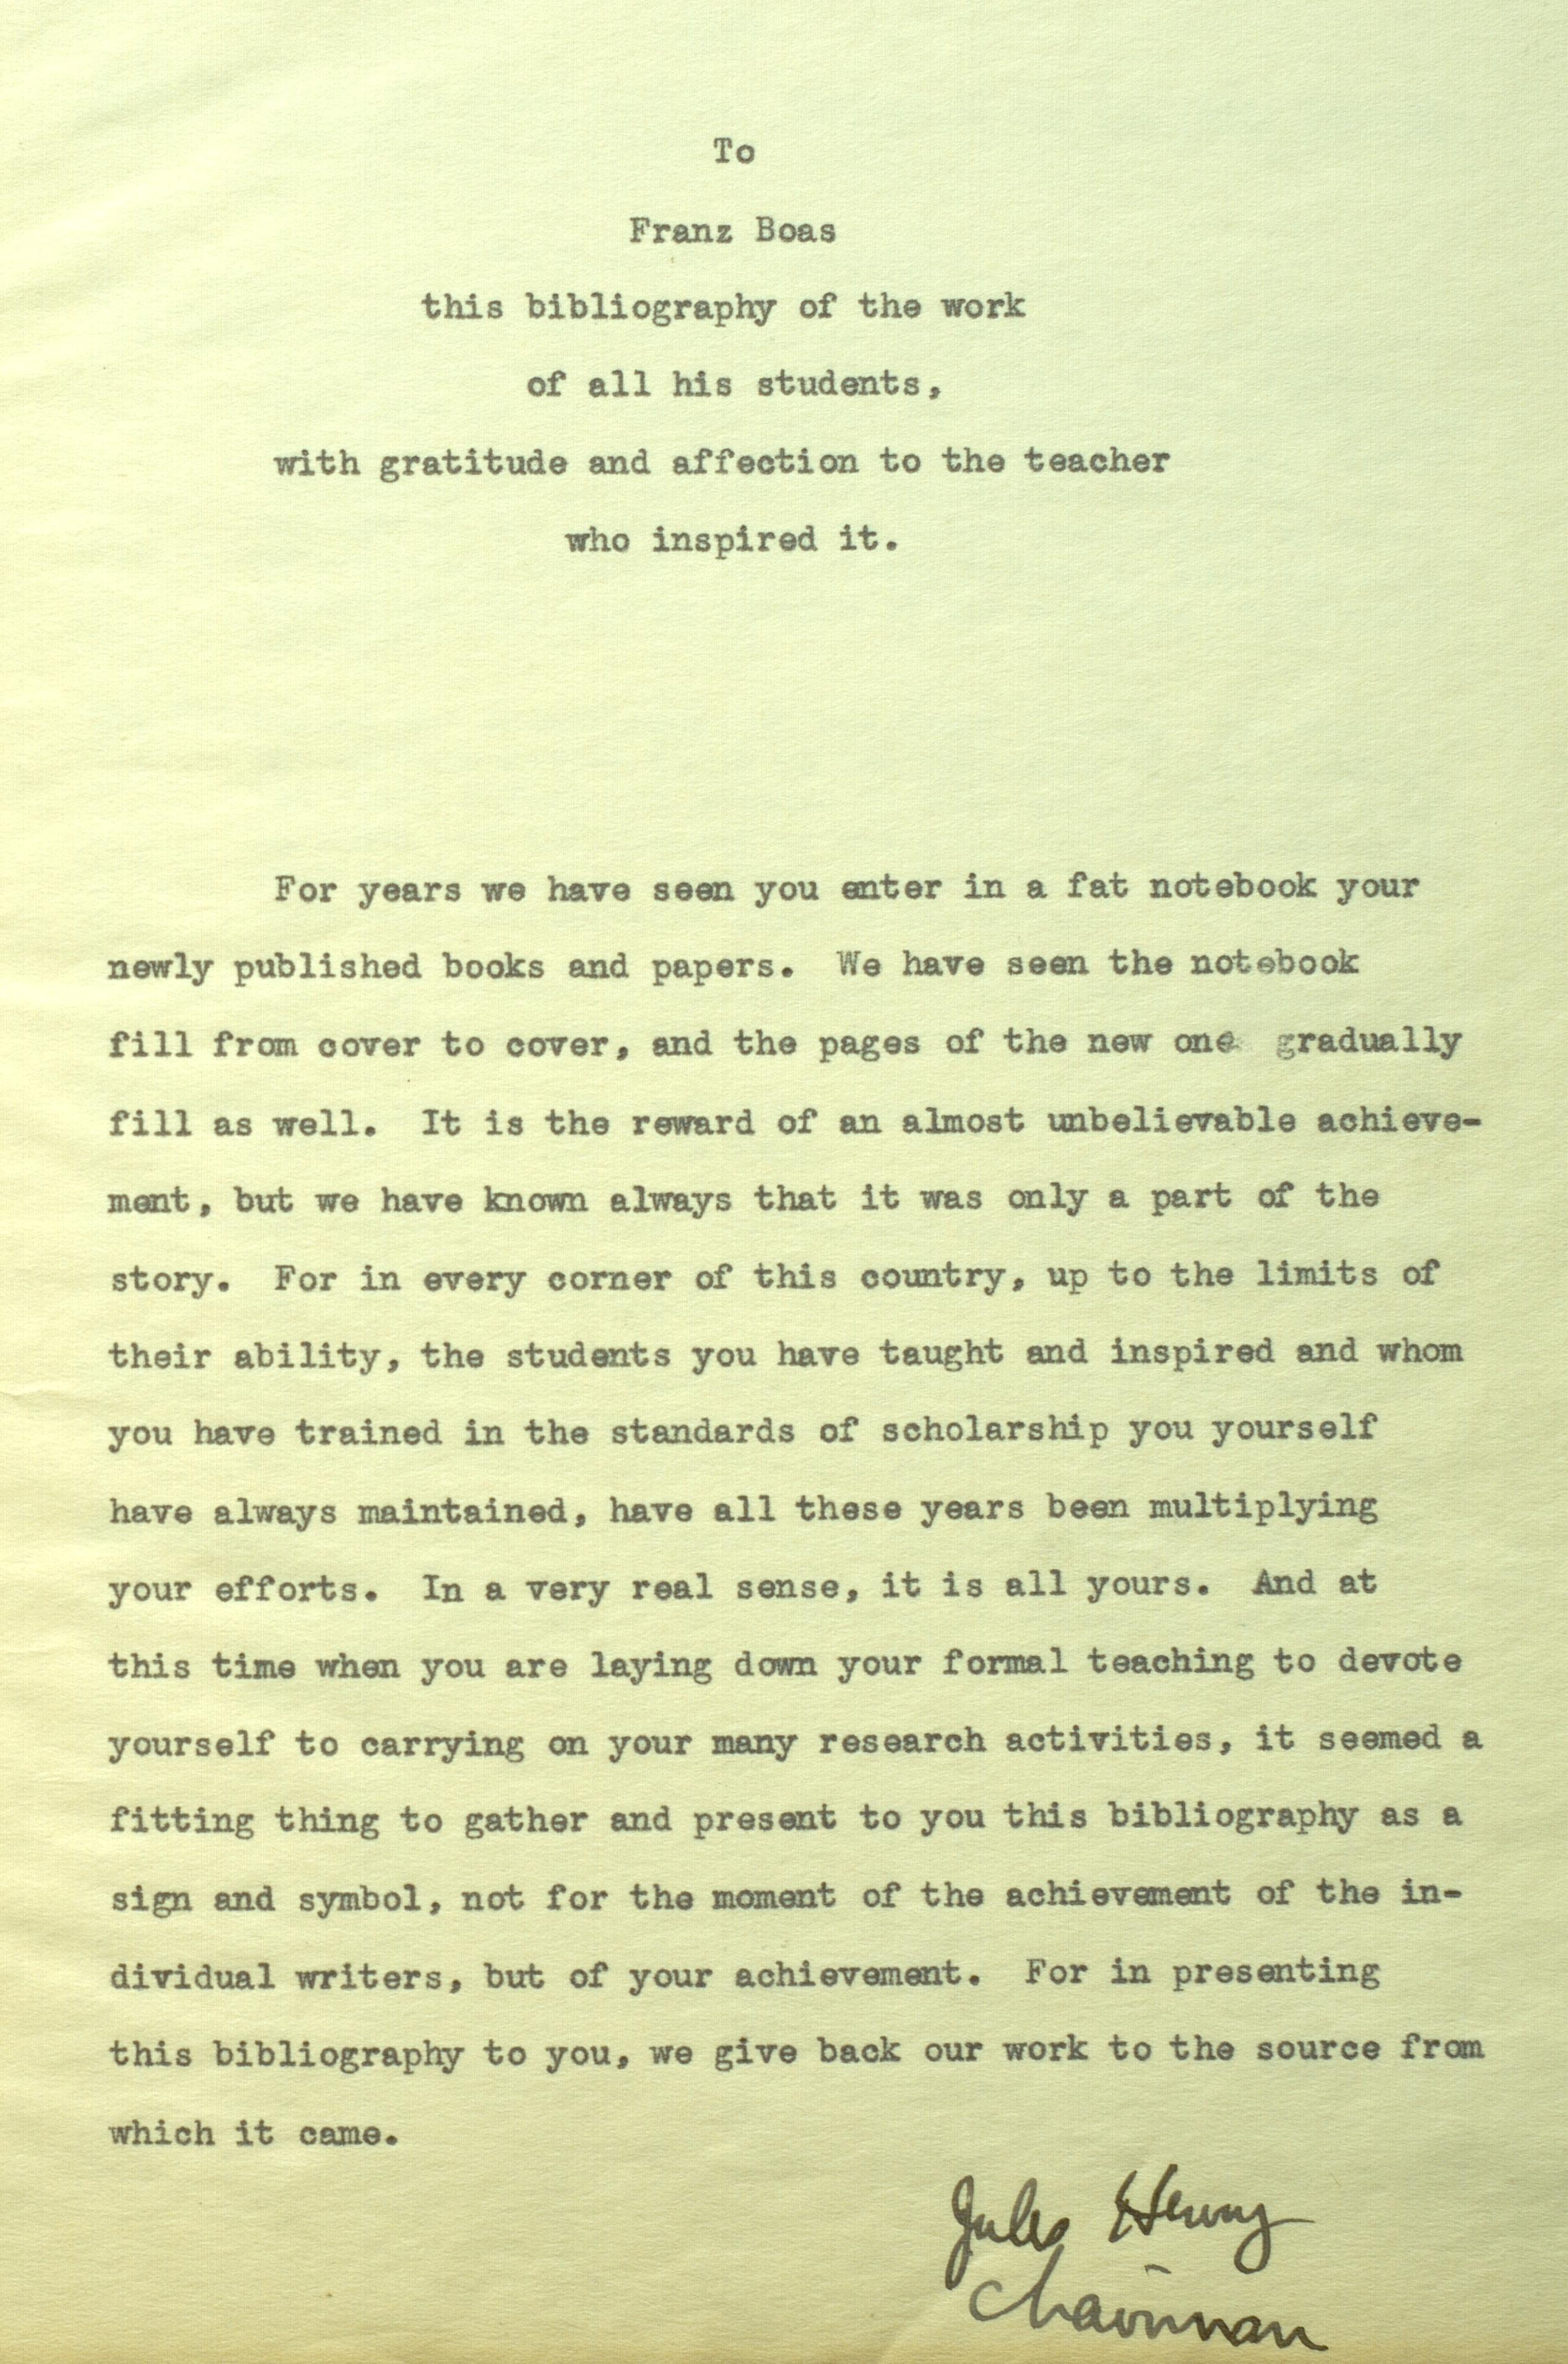 scan of typed document on yellowing paper